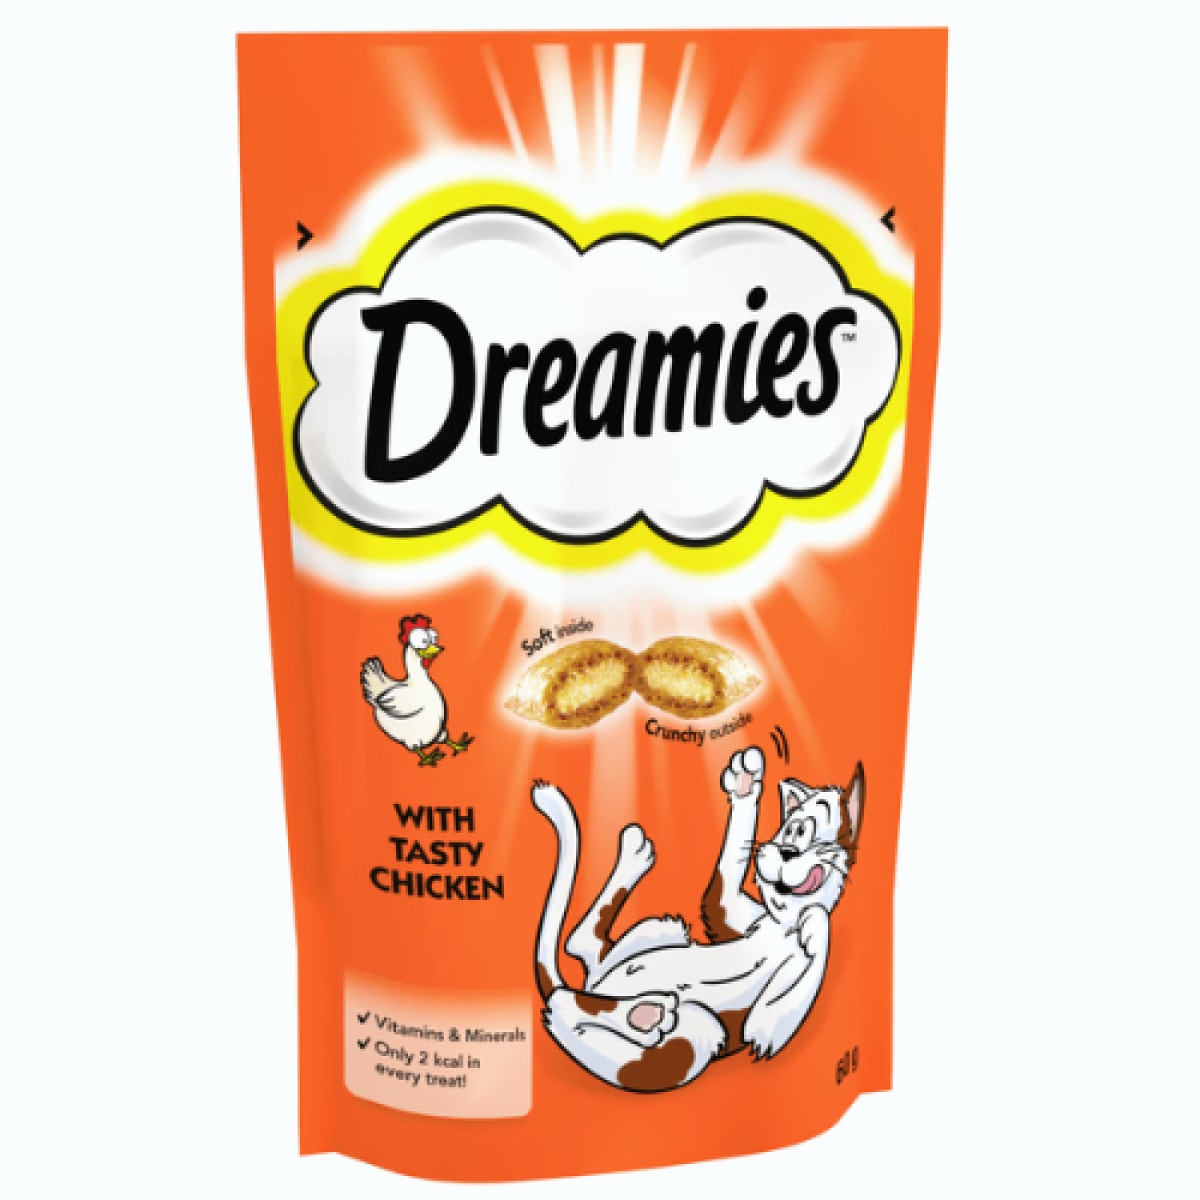 Dreamies with Tasty Chicken 60g Main Image